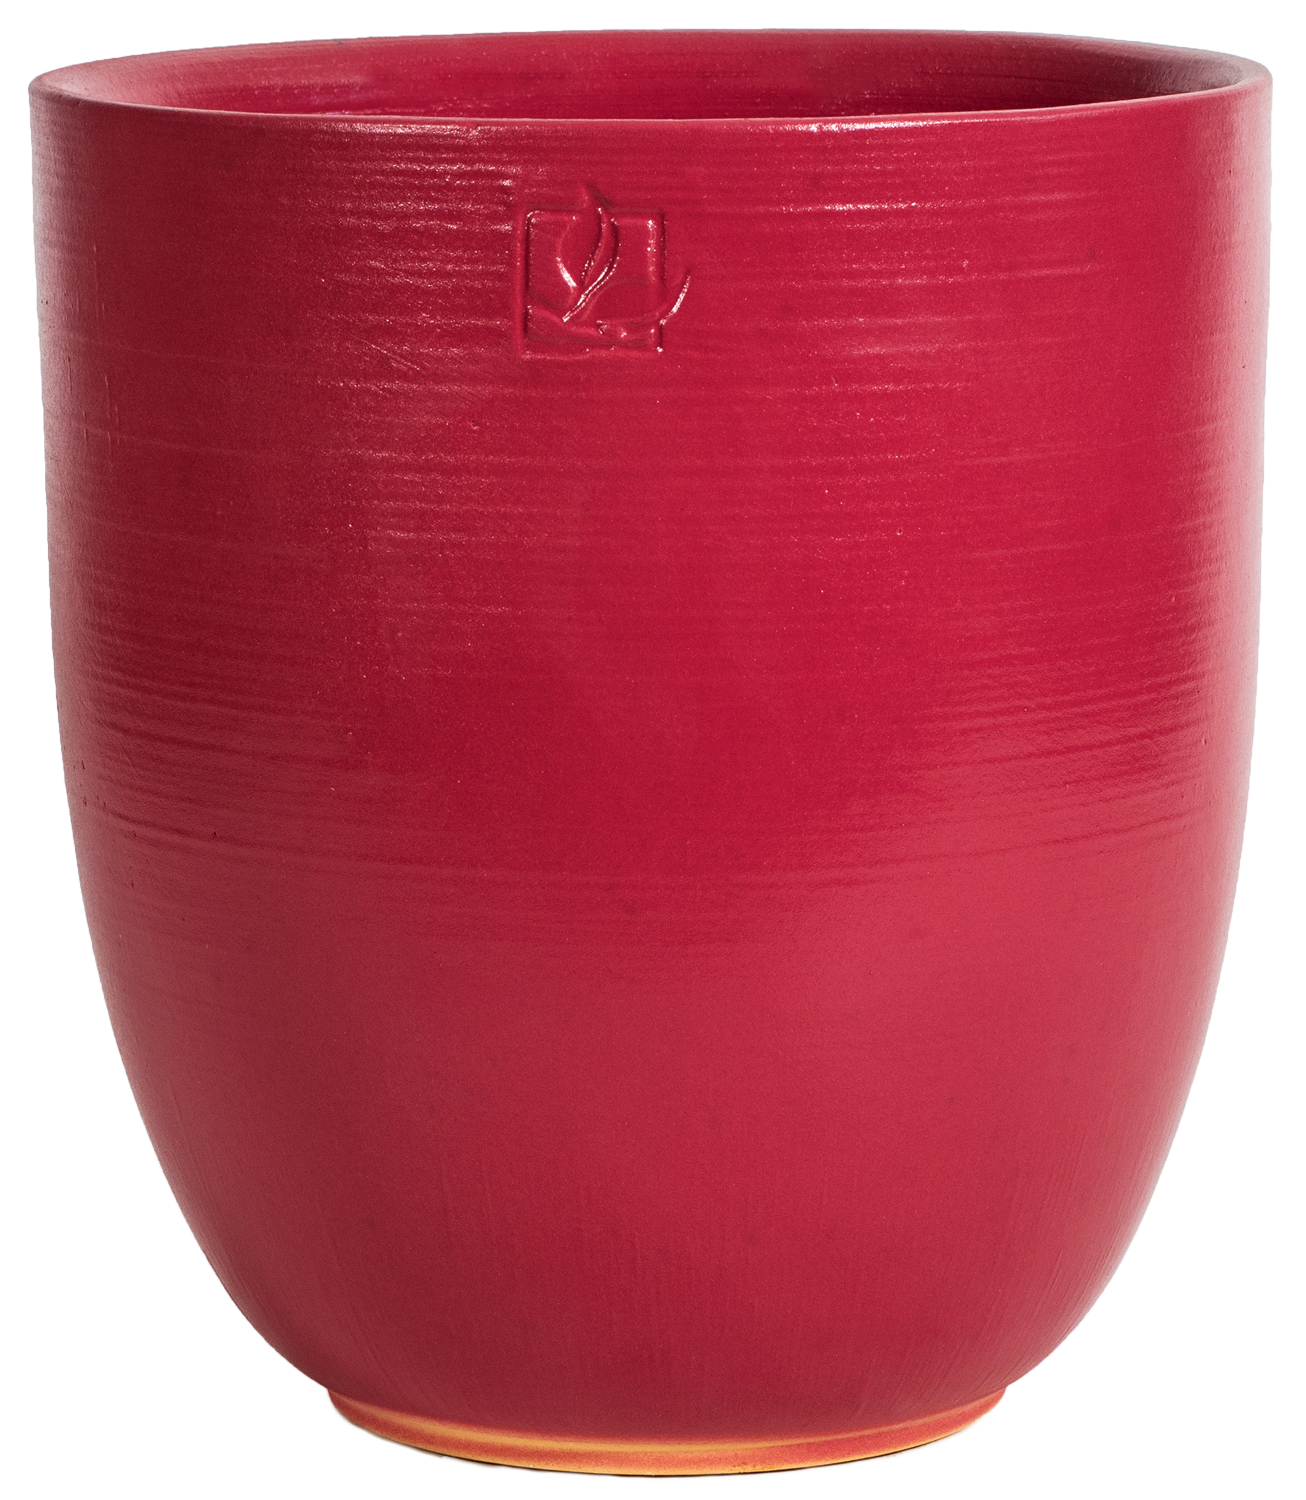 tall rounded red ceramic planter with a leaf stamp